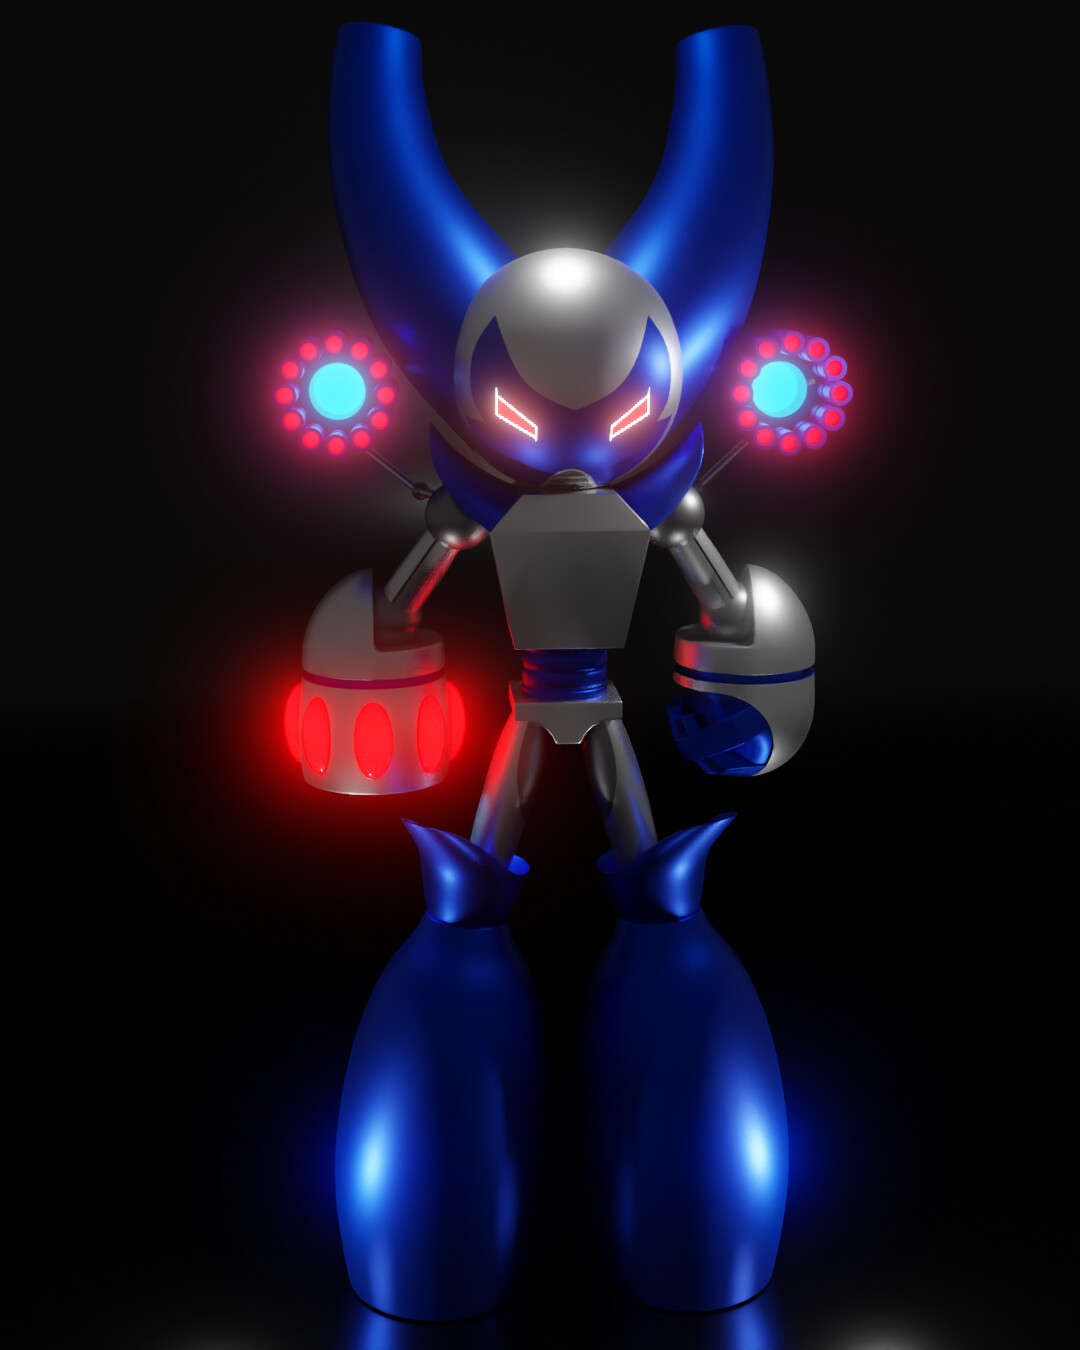 RobotBoy - 3D Model by supercigale